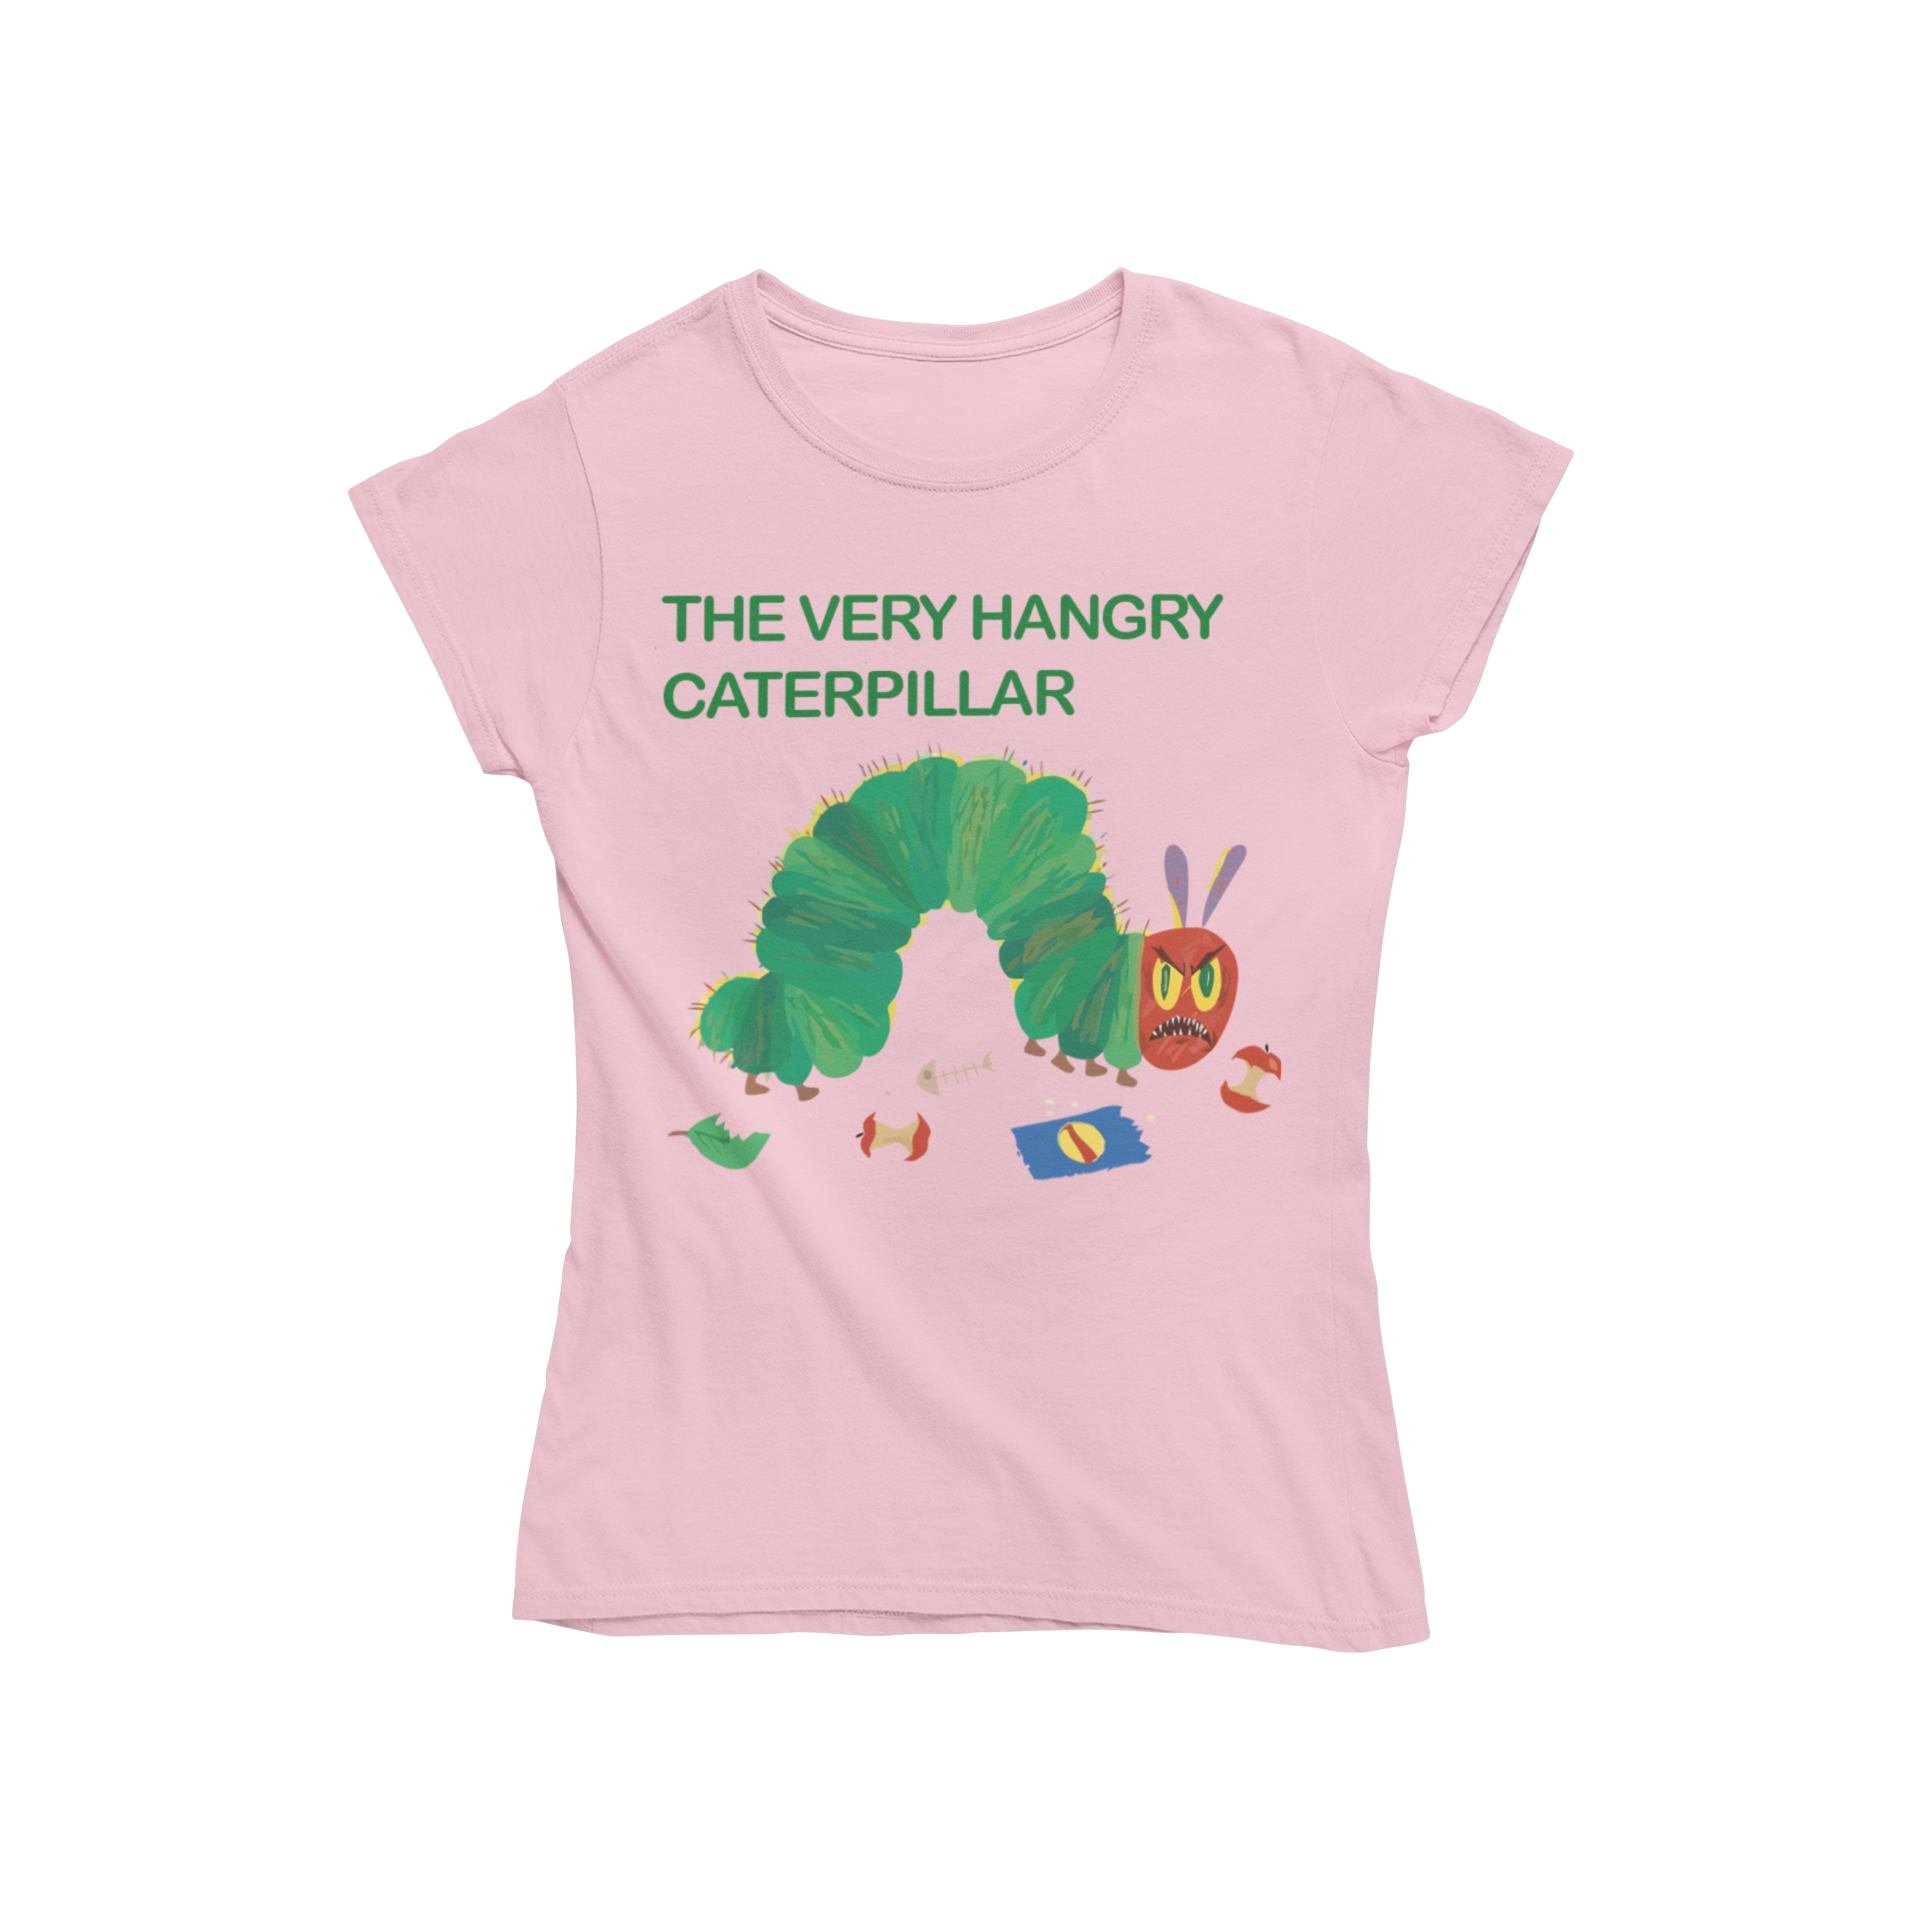 Looking for a funny t-shirt? Teevolution has just what you need! Check out our women's fitted "Very Hangry Caterpillar" t-shirt, inspired by the classic book "The Very Hungry Caterpillar". You won't be able to resist this hilarious and playful tee!